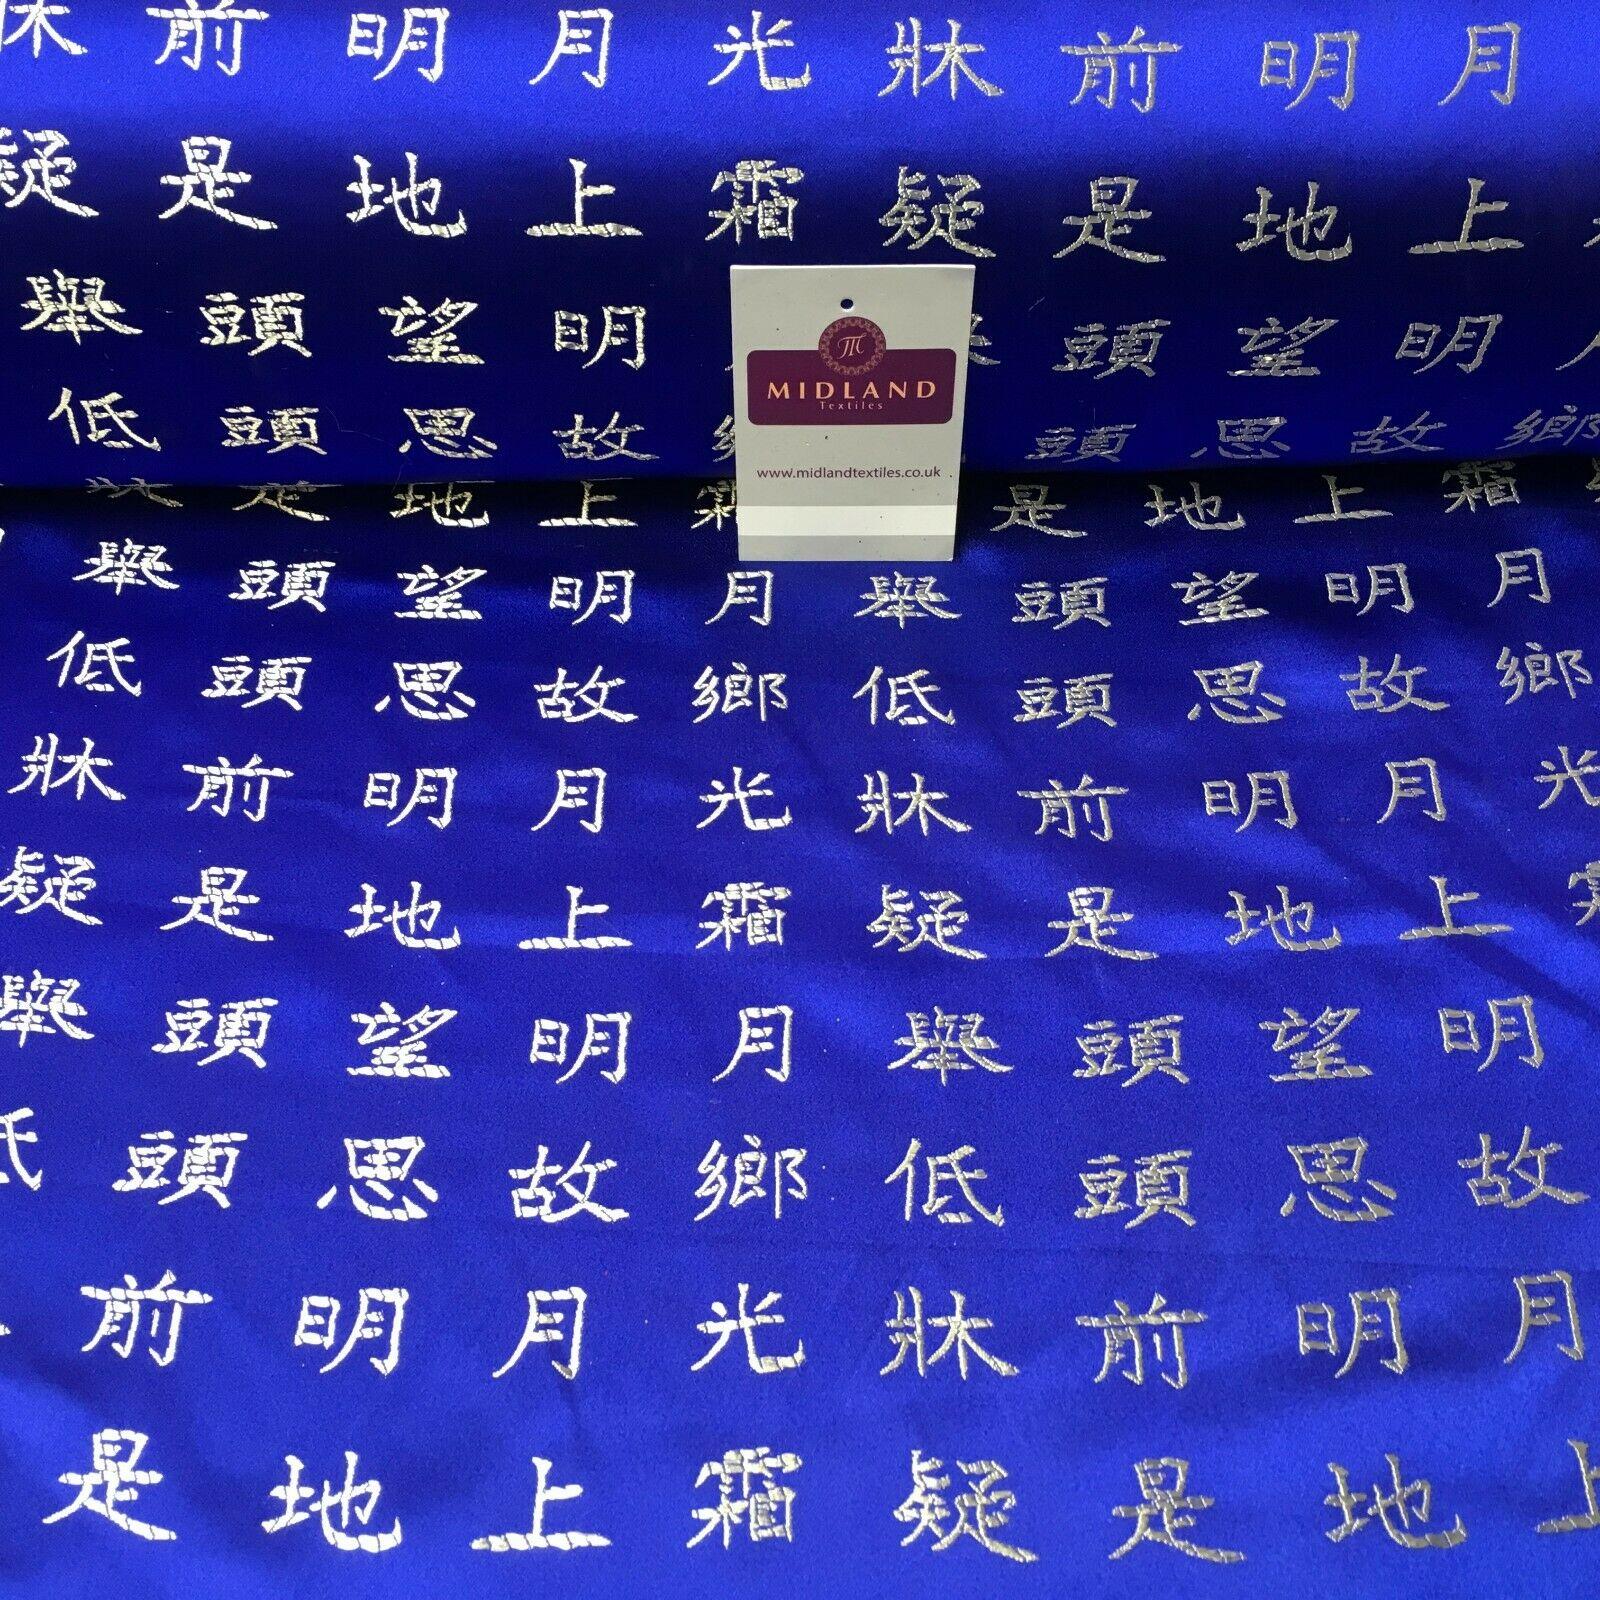 Royal Blue and Silver Chinese Words Brocade Dress Fabric 110cm Wide M395-24